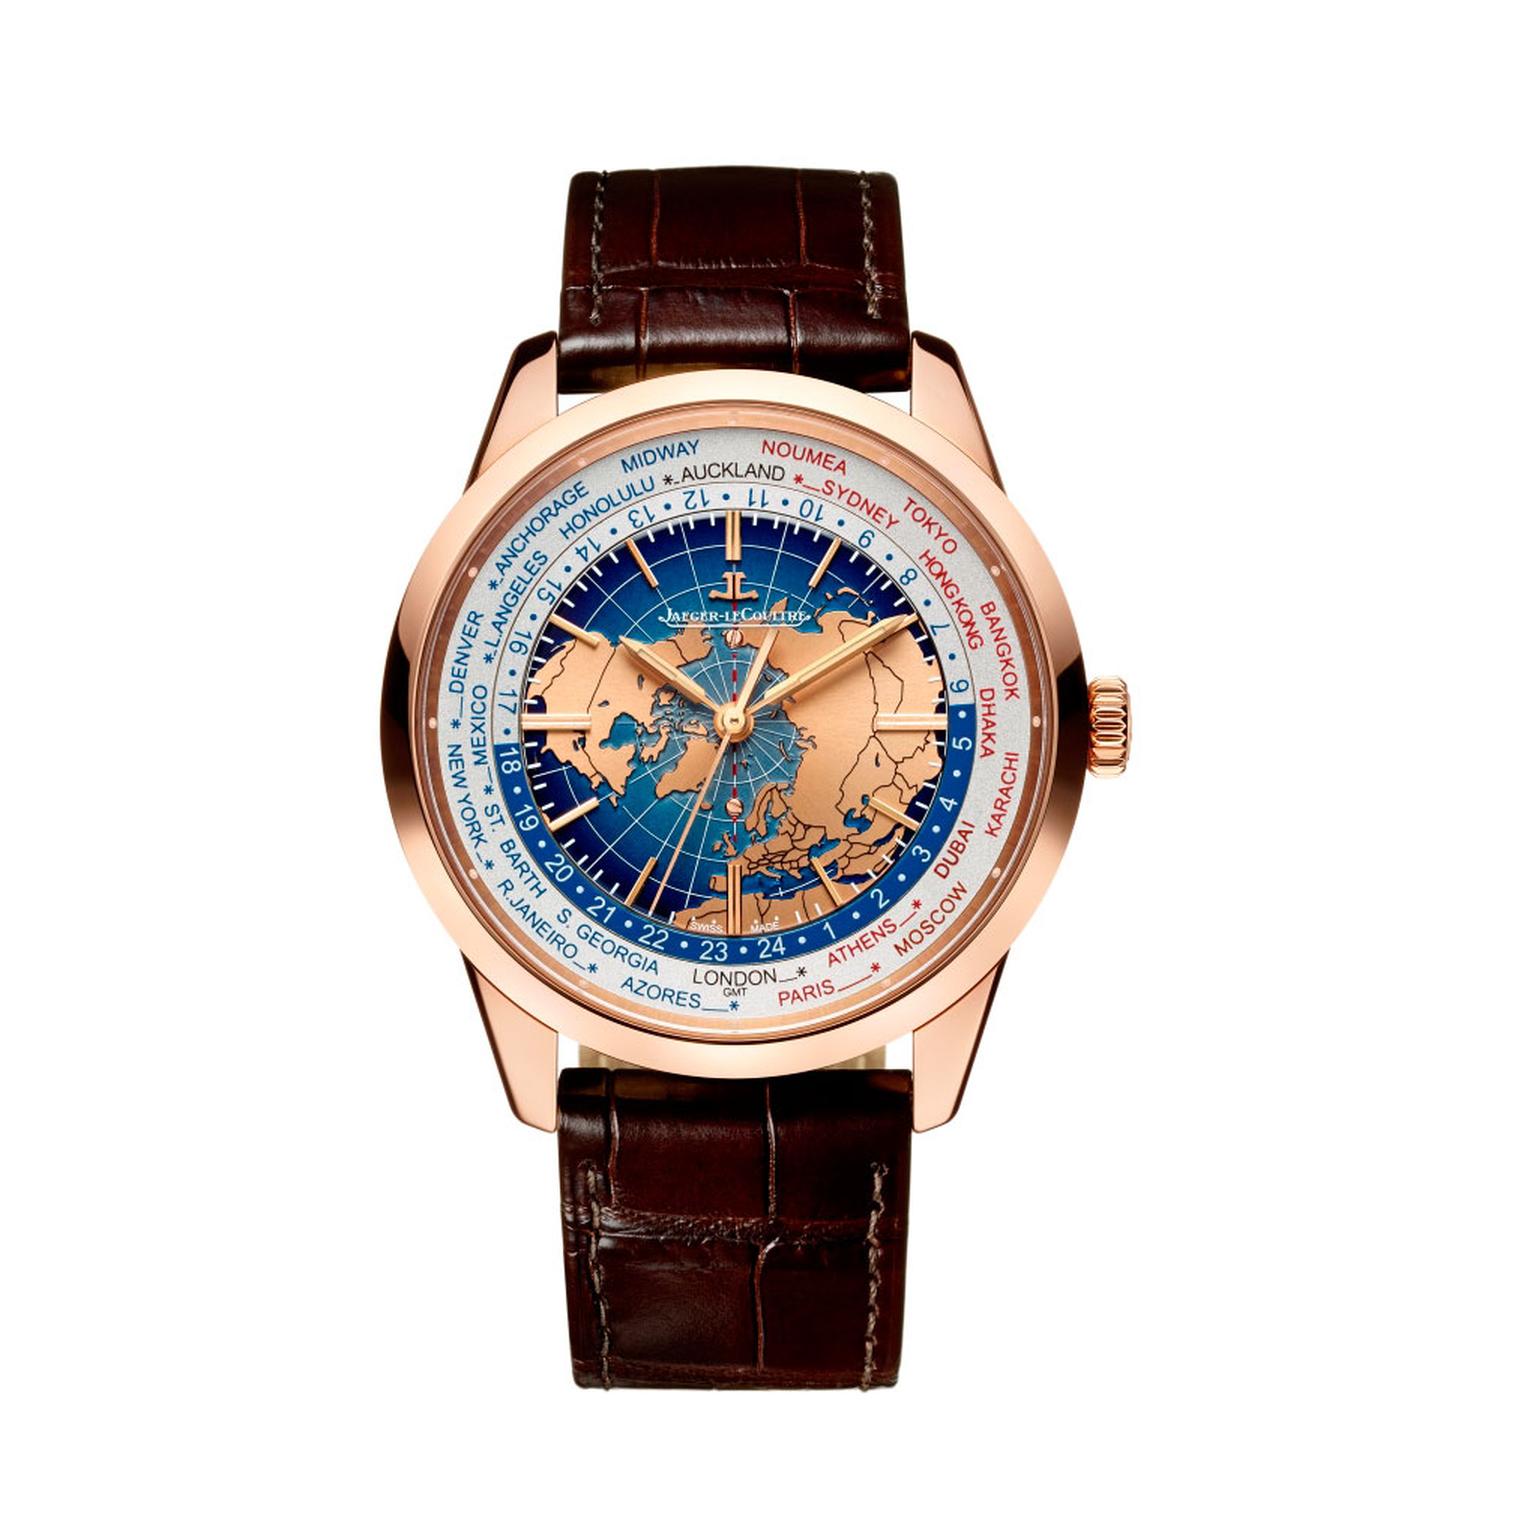 Jaeger-LeCoultre Geophysic Universal Time PG watch